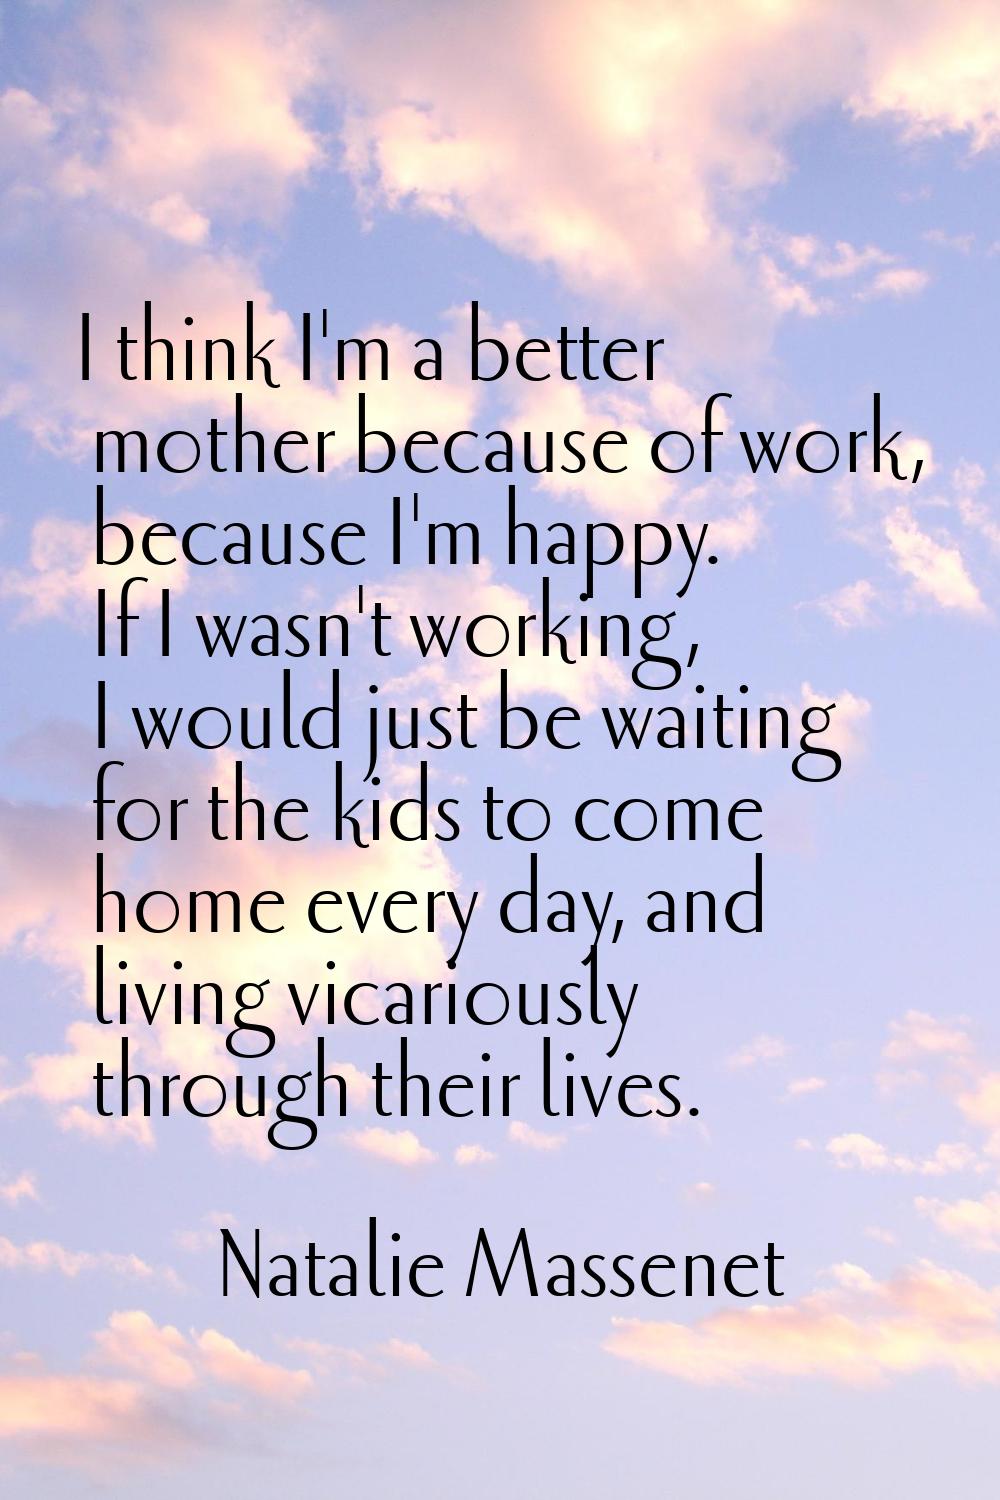 I think I'm a better mother because of work, because I'm happy. If I wasn't working, I would just b